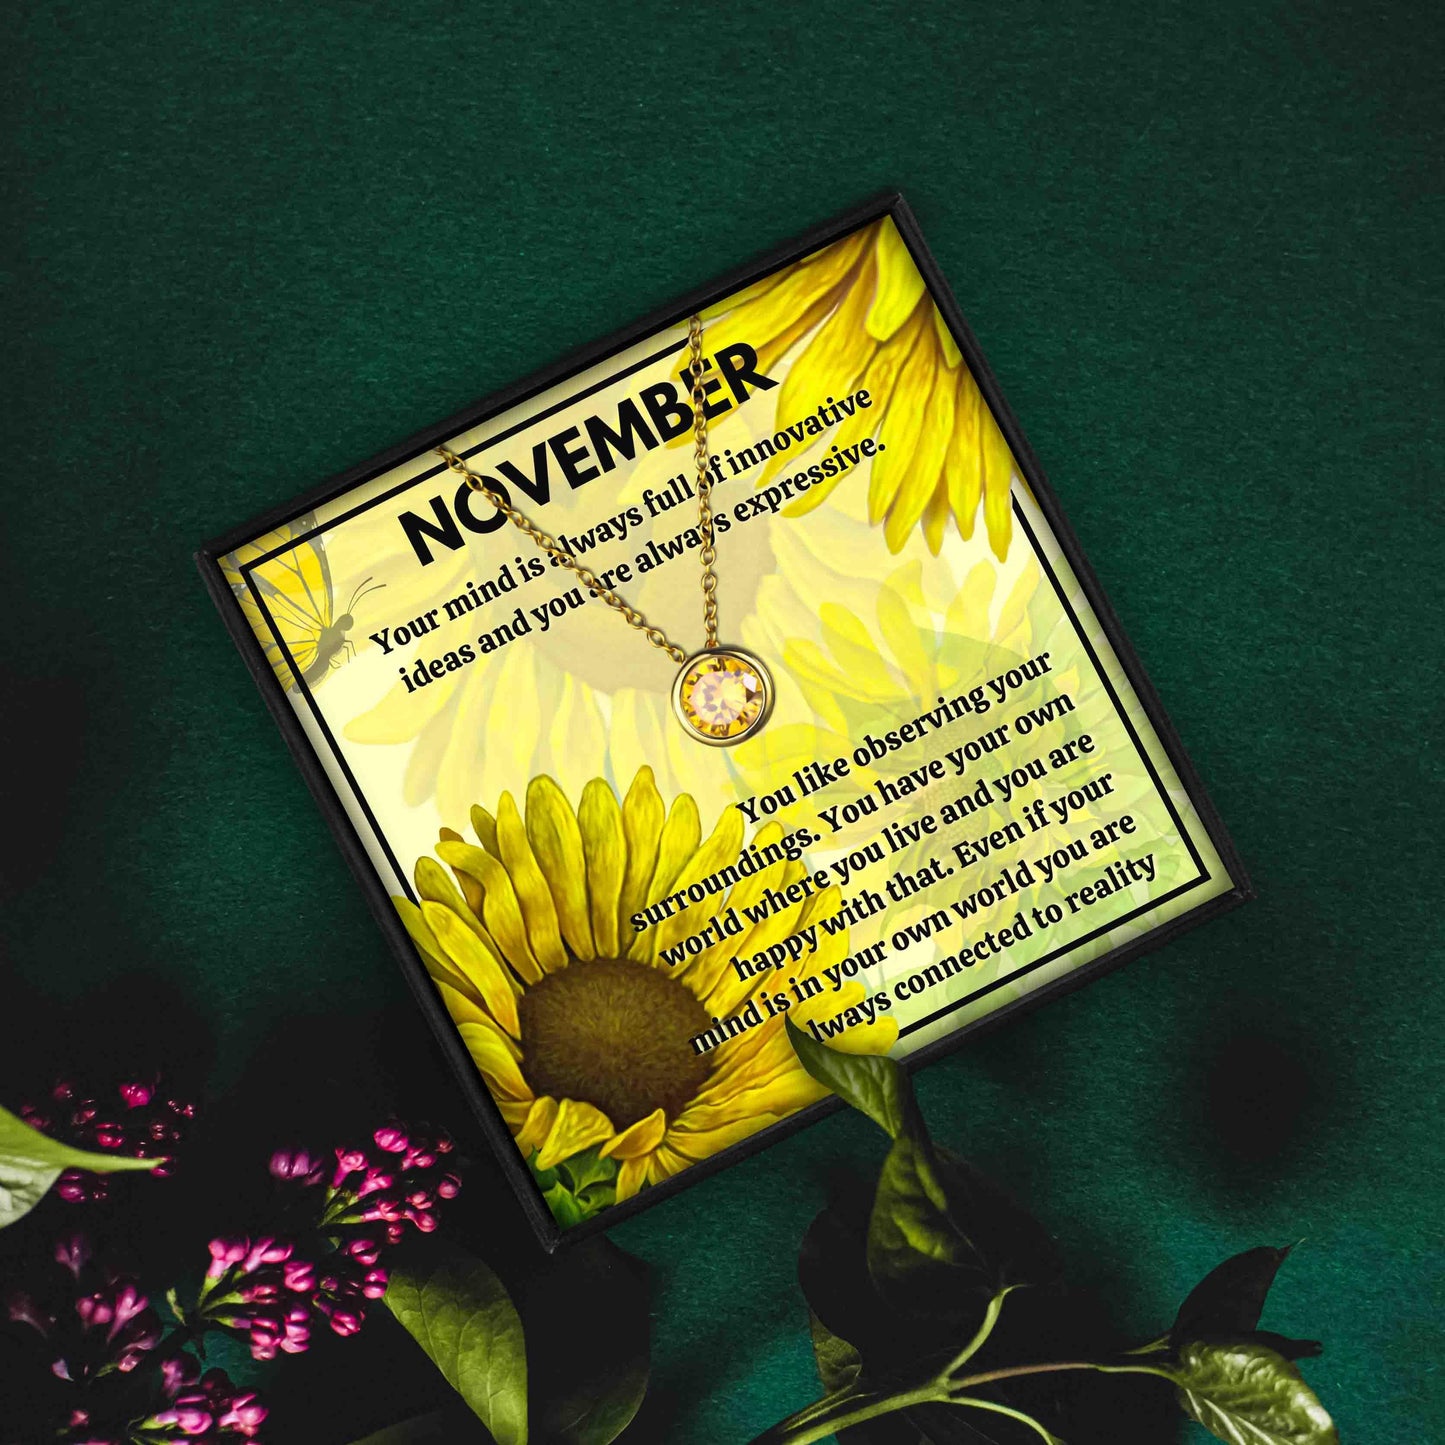 Meaningful November Birthstone Necklace Gift Set in 2023 | Meaningful November Birthstone Necklace Gift Set - undefined | november birthstone, november birthstone color, november birthstone jewelry, november birthstone meaning, november birthstone necklace | From Hunny Life | hunnylife.com